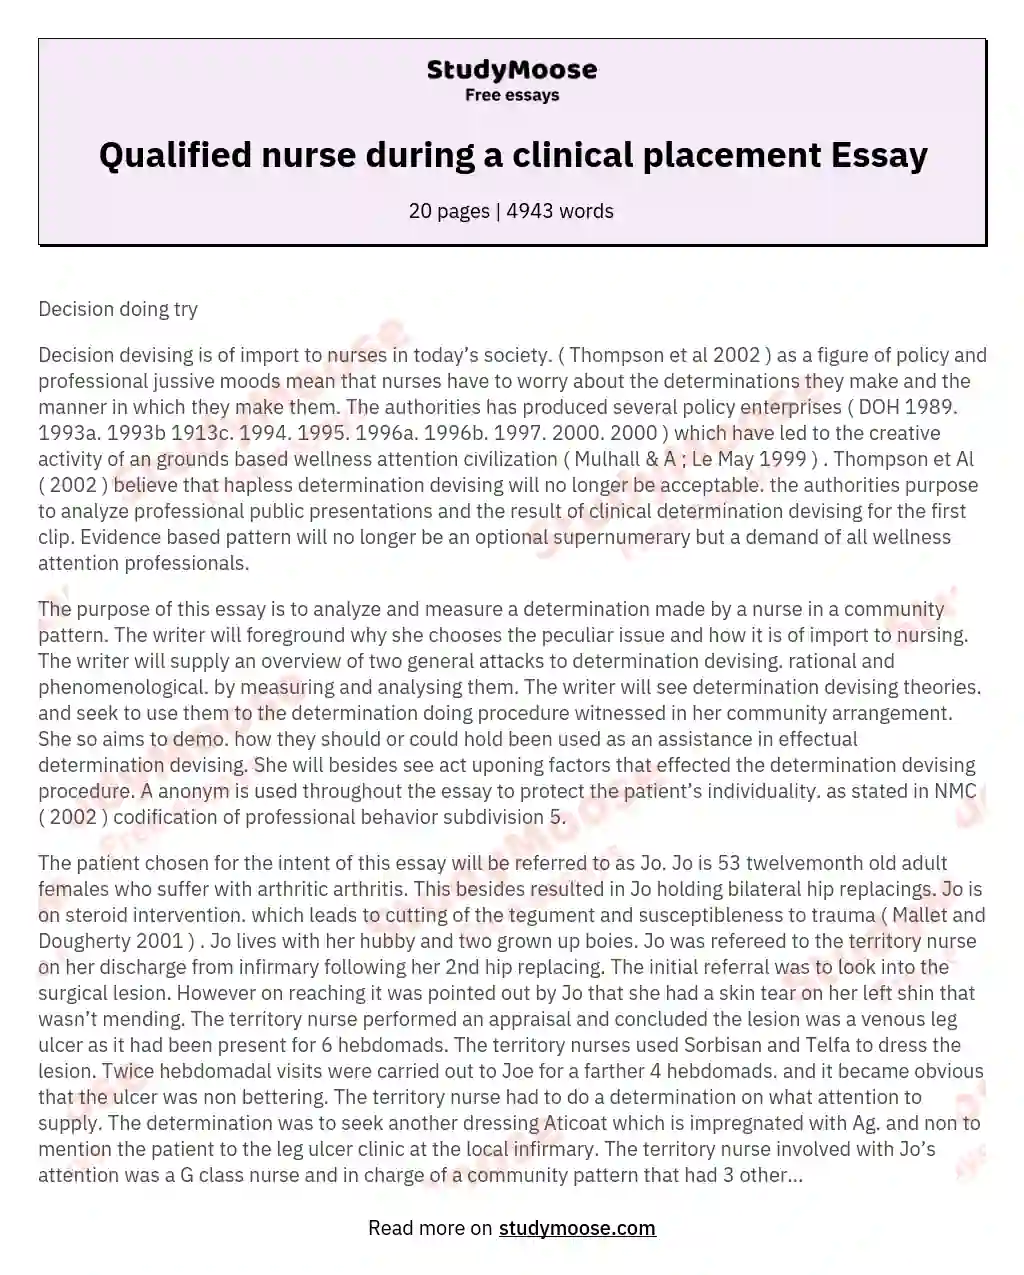 Qualified nurse during a clinical placement Essay essay